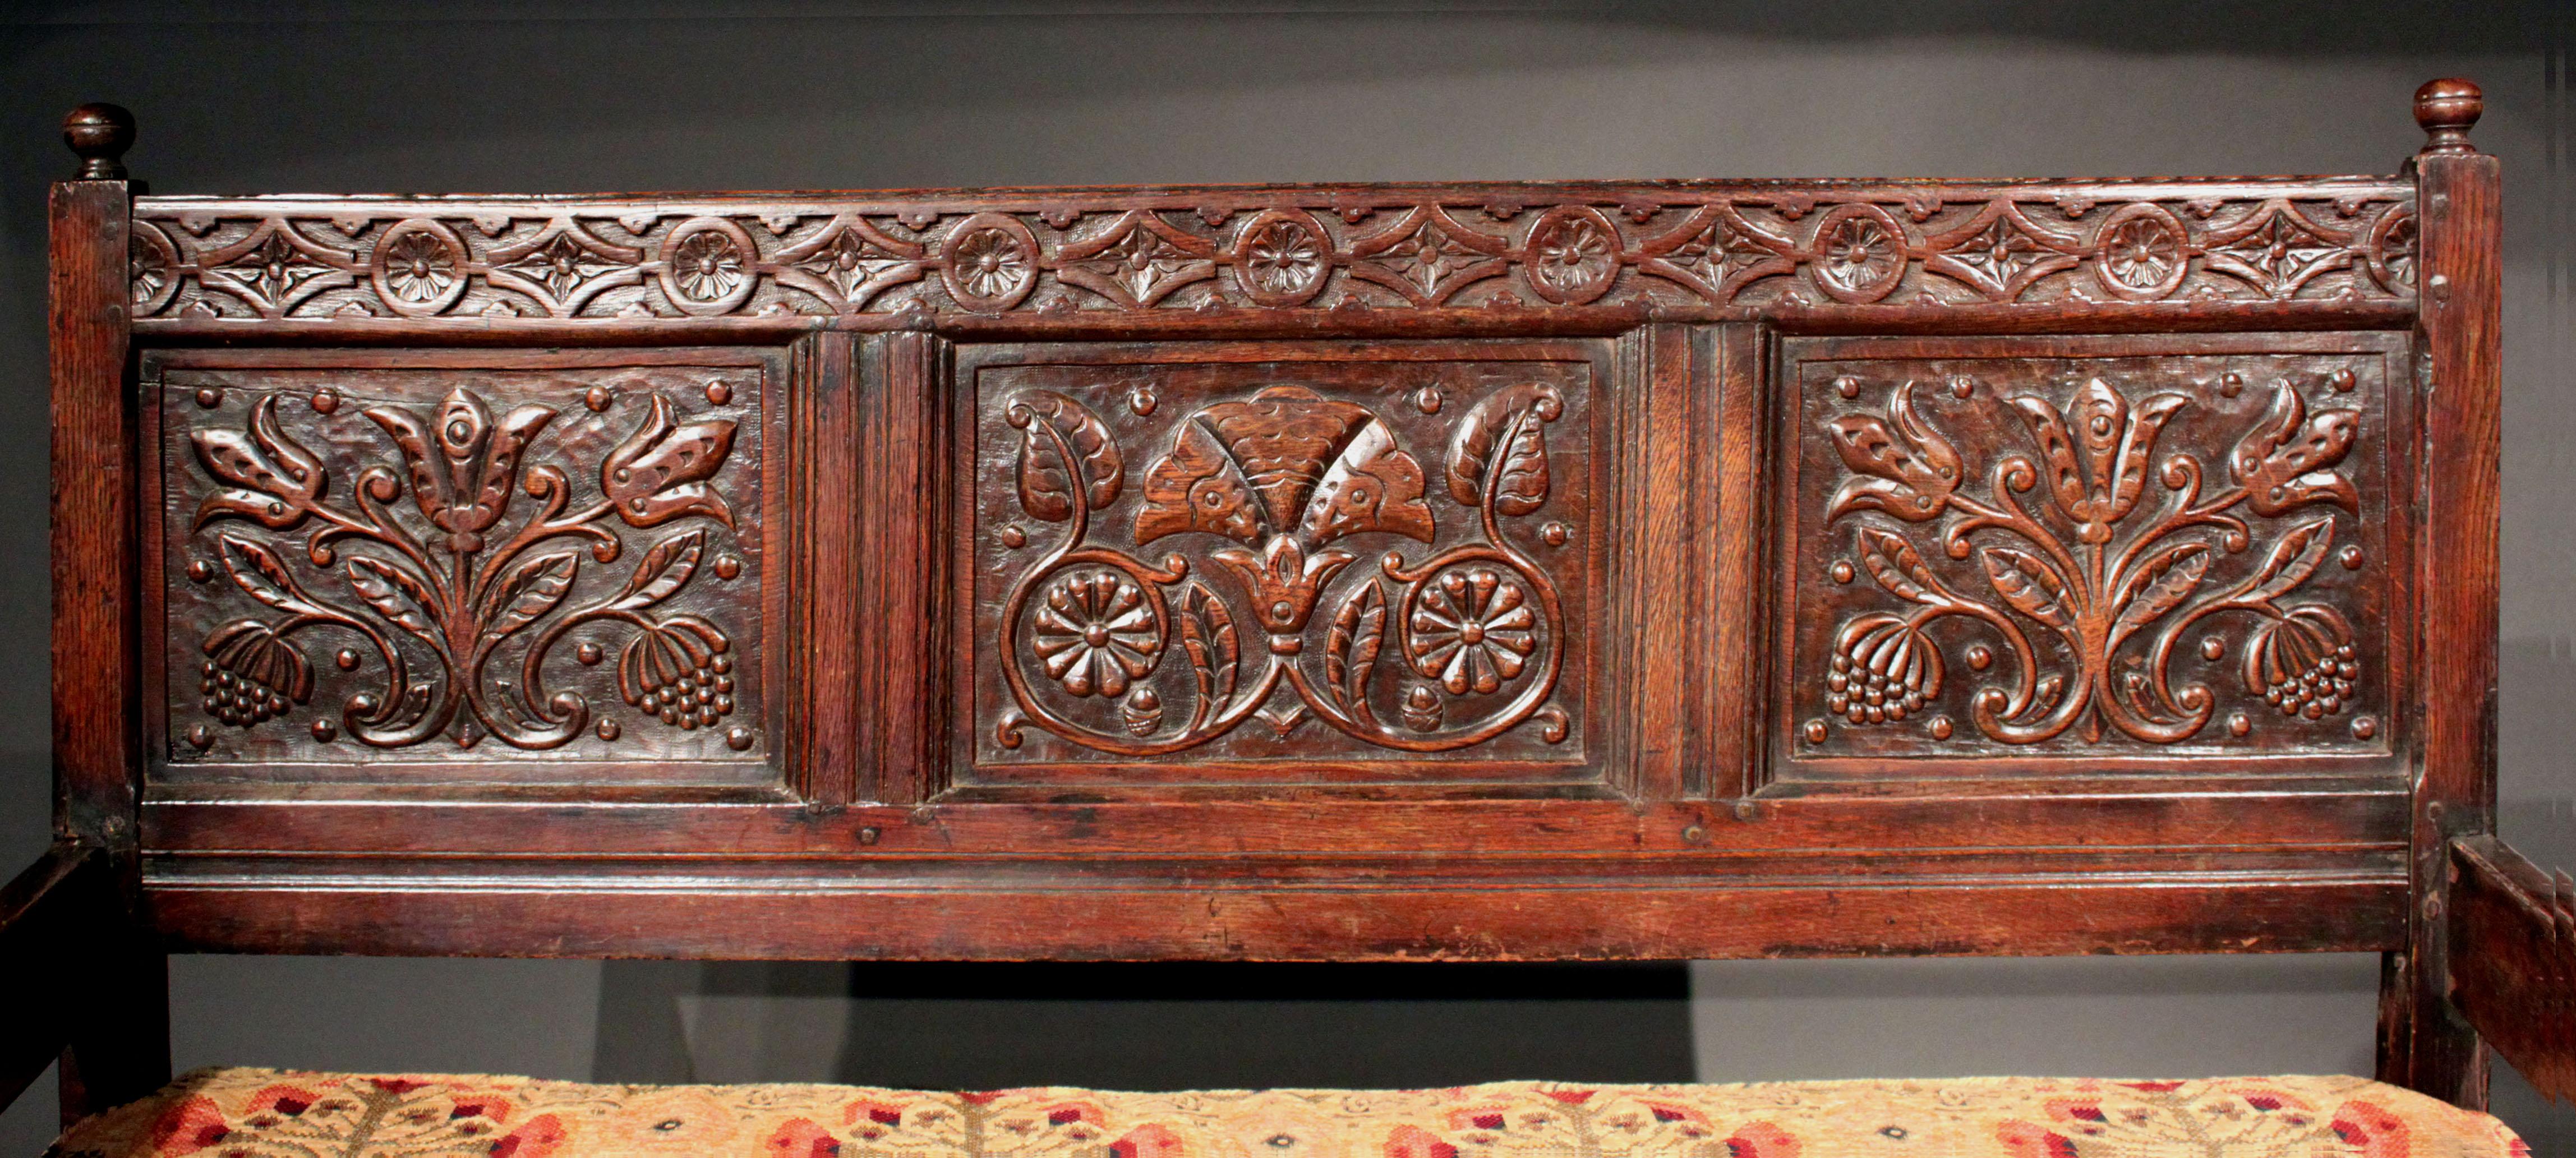 Late 17th Century Carved Oak Settle In Good Condition For Sale In Bradford-on-Avon, Wiltshire